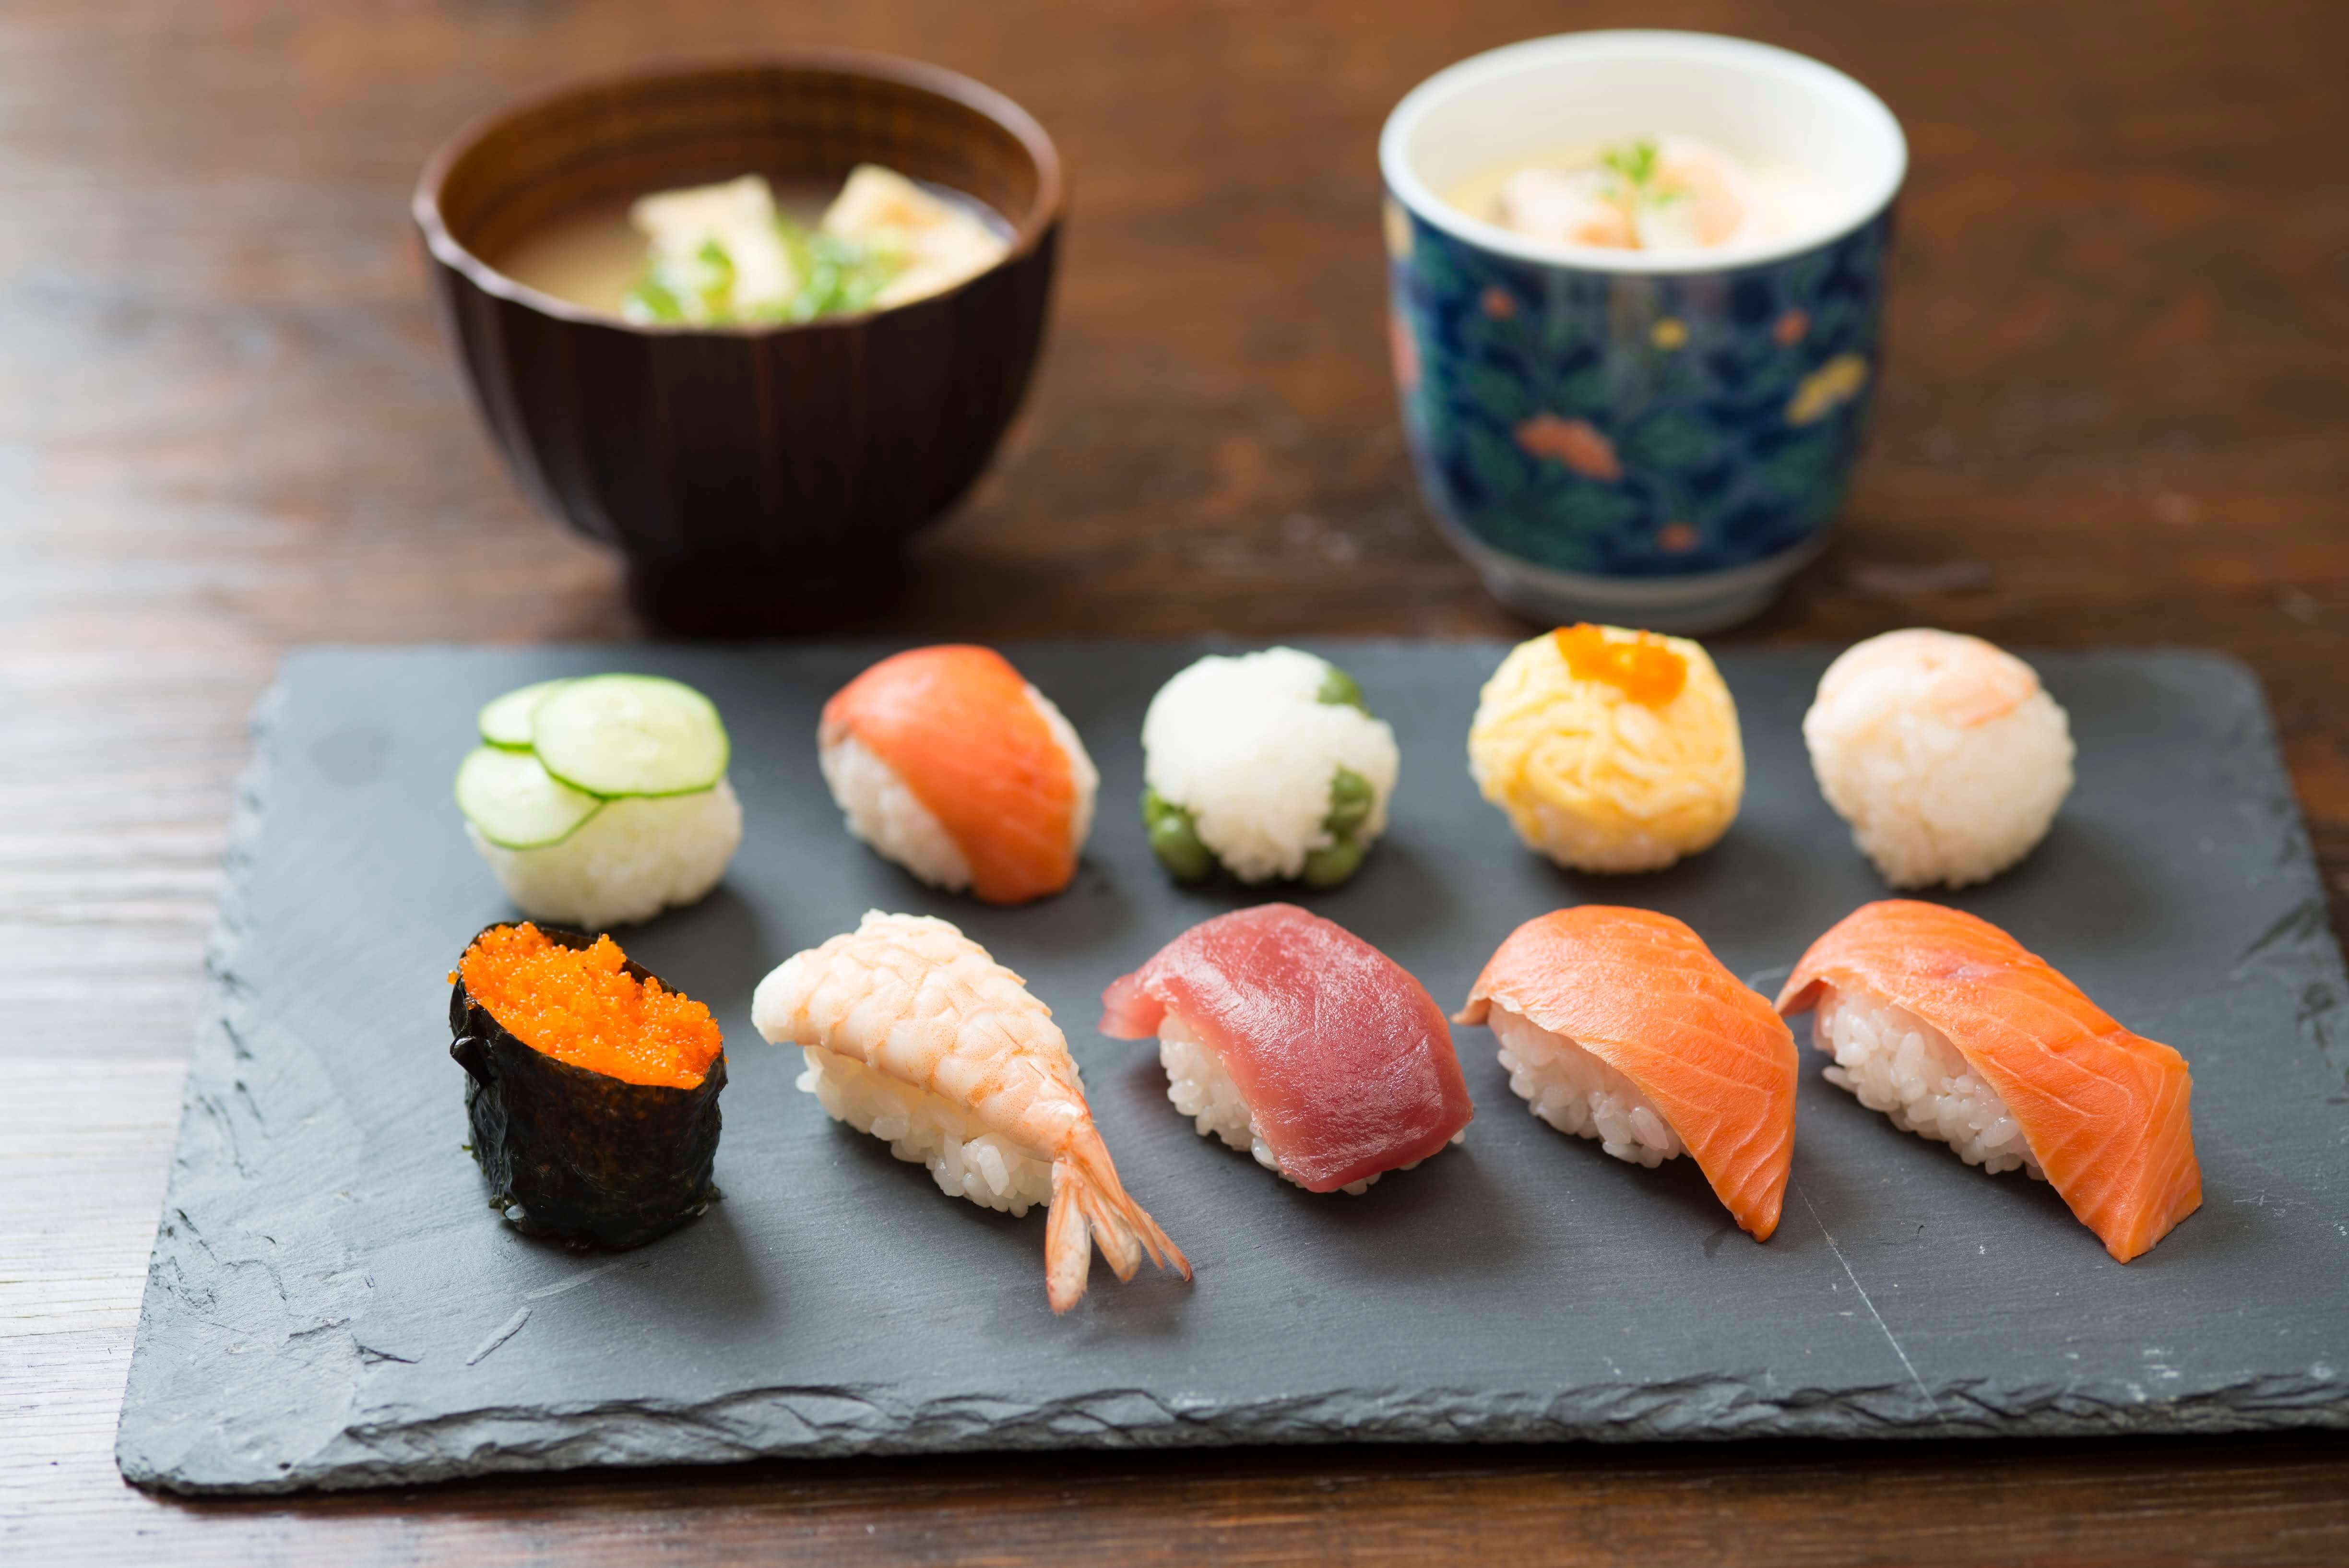 Let's make your own sushi!  /3 kinds of sushi, Japanese omelette, miso soup